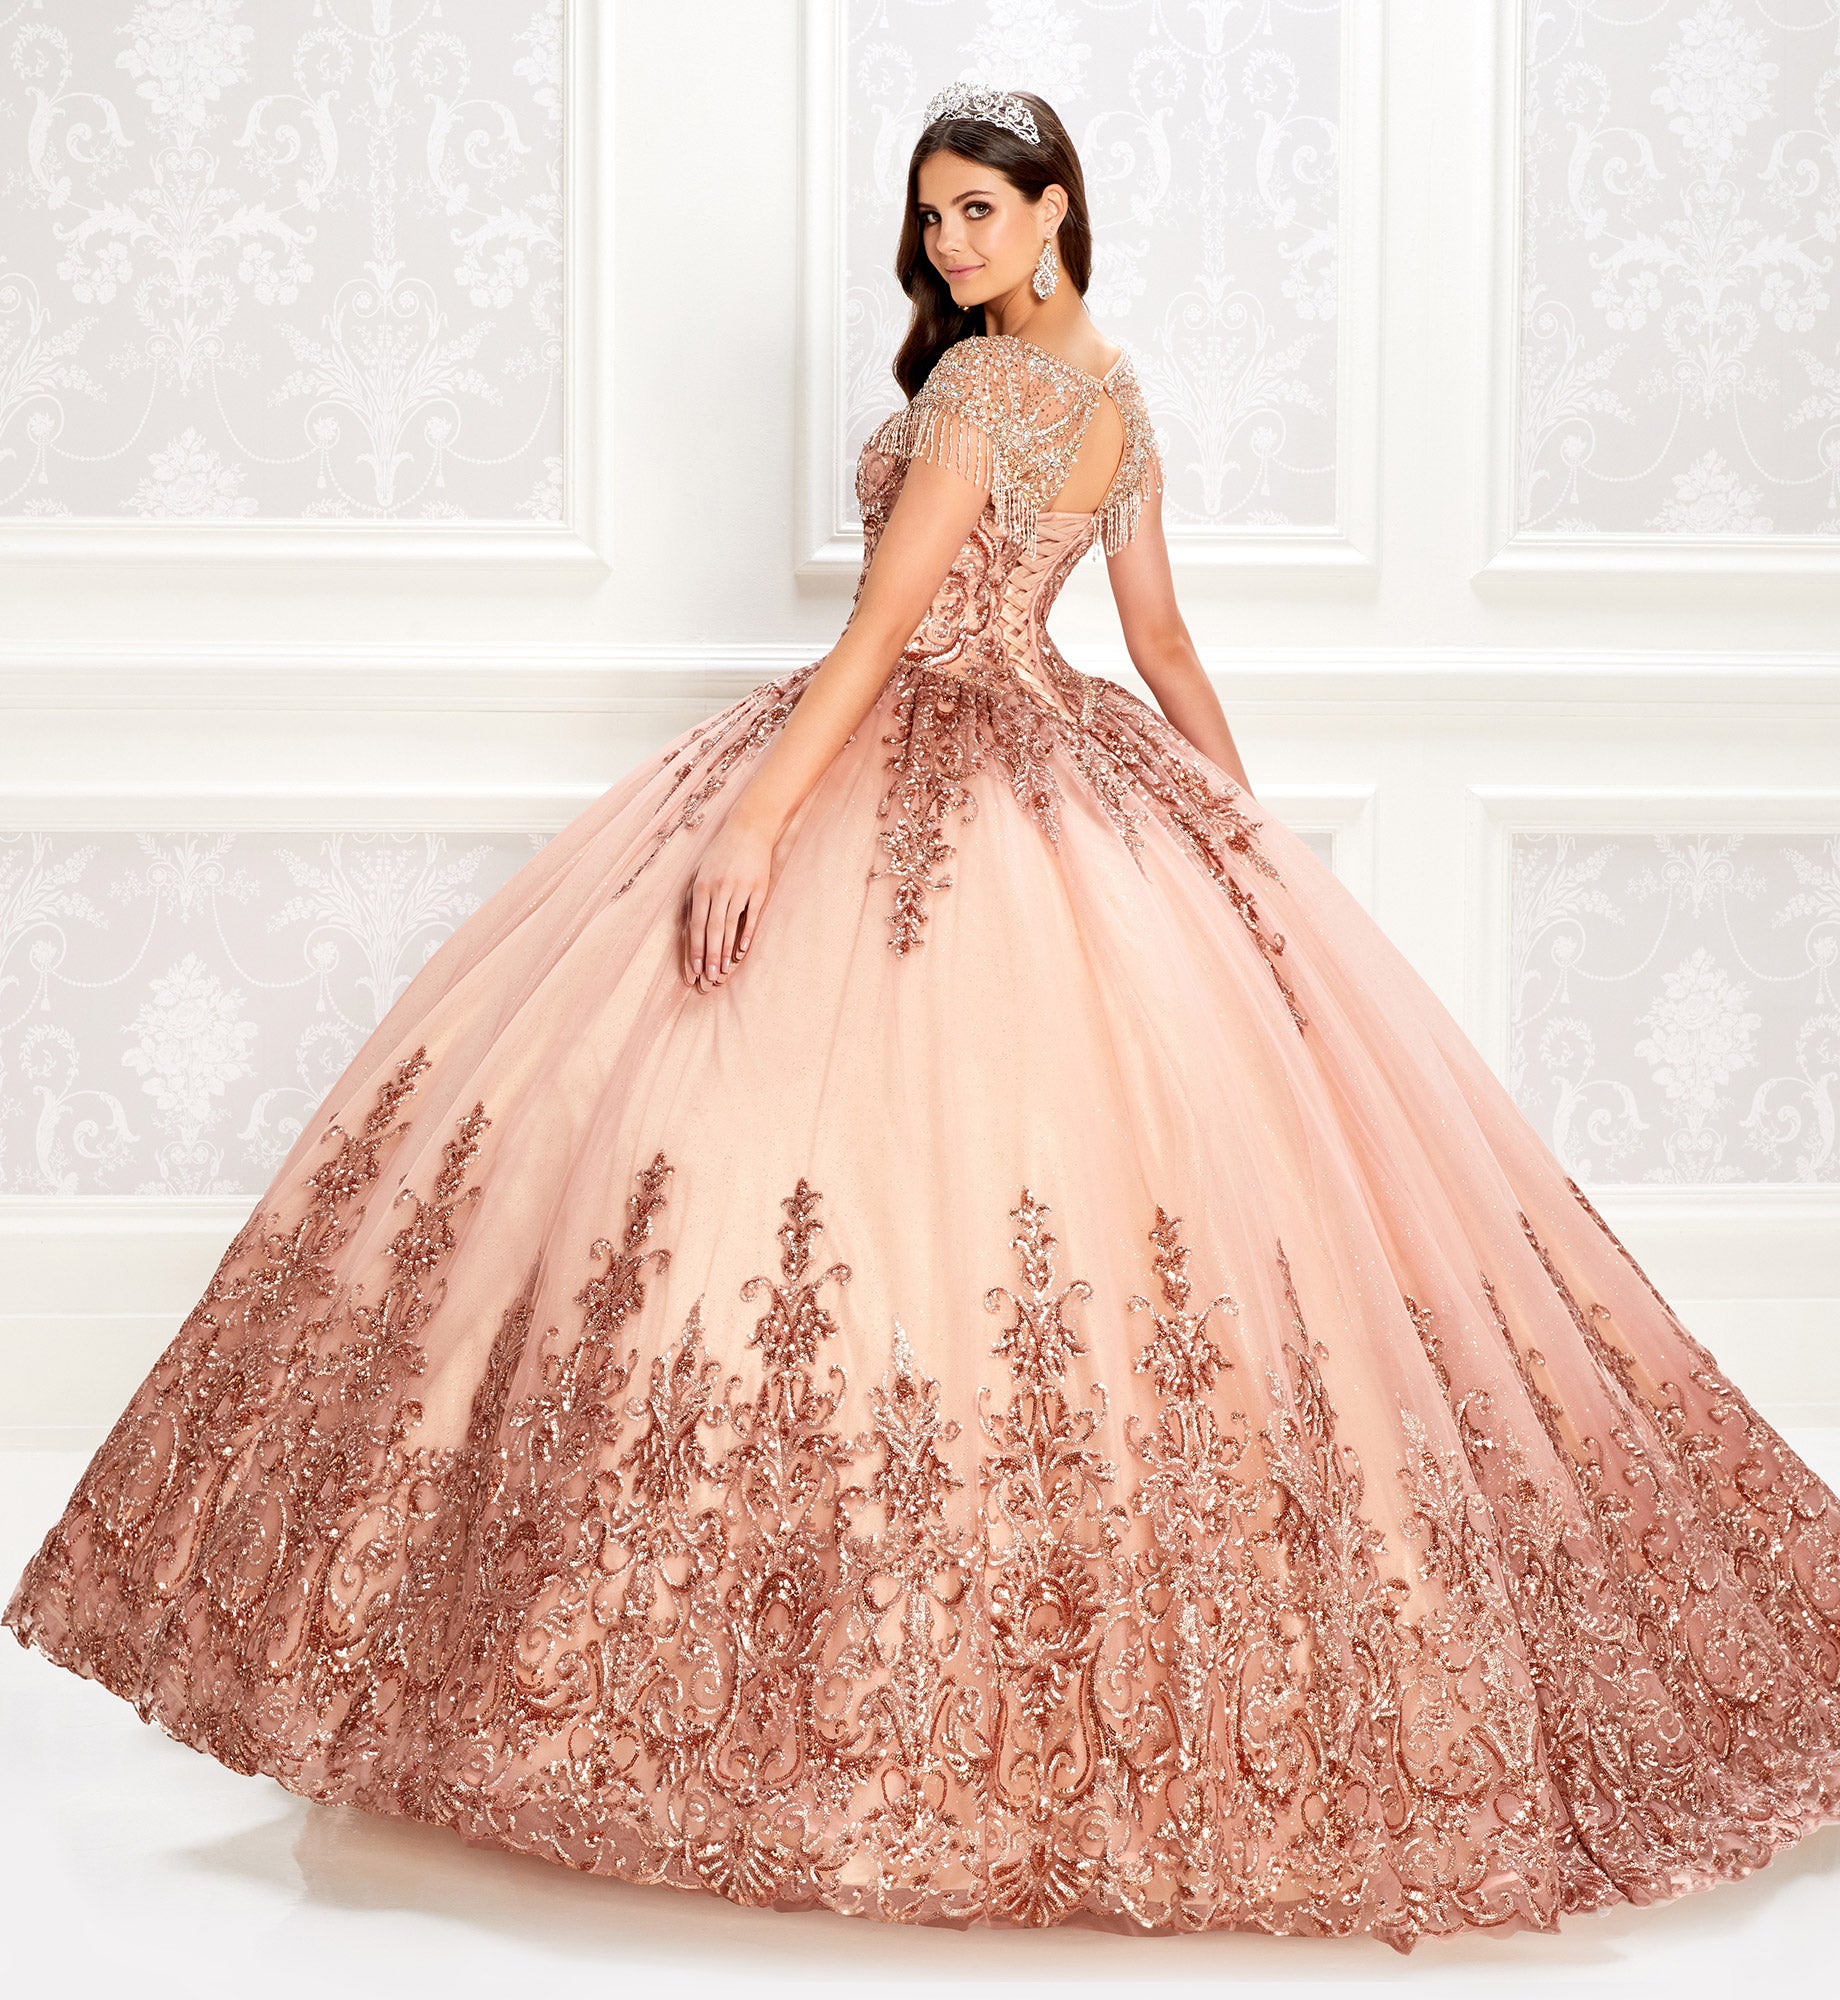 Beautiful quinceanera dress with jewel neckline and beaded fringe